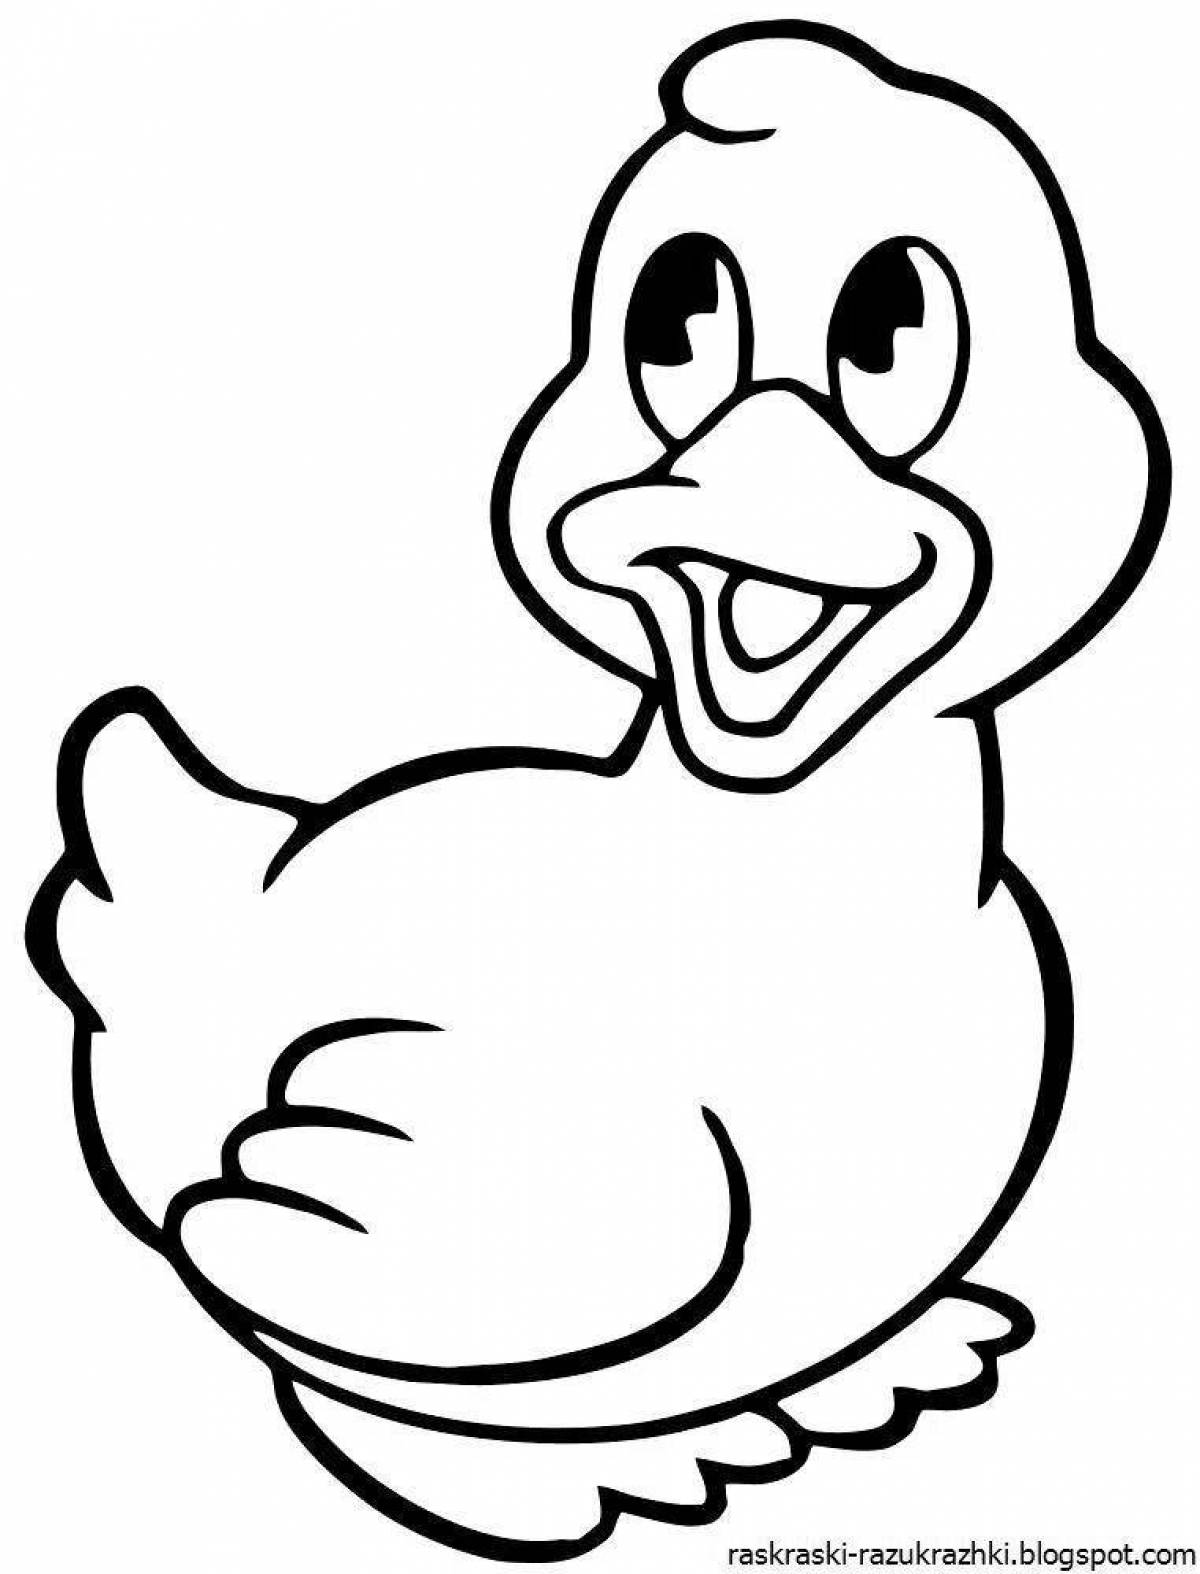 Amazing duck coloring book for kids